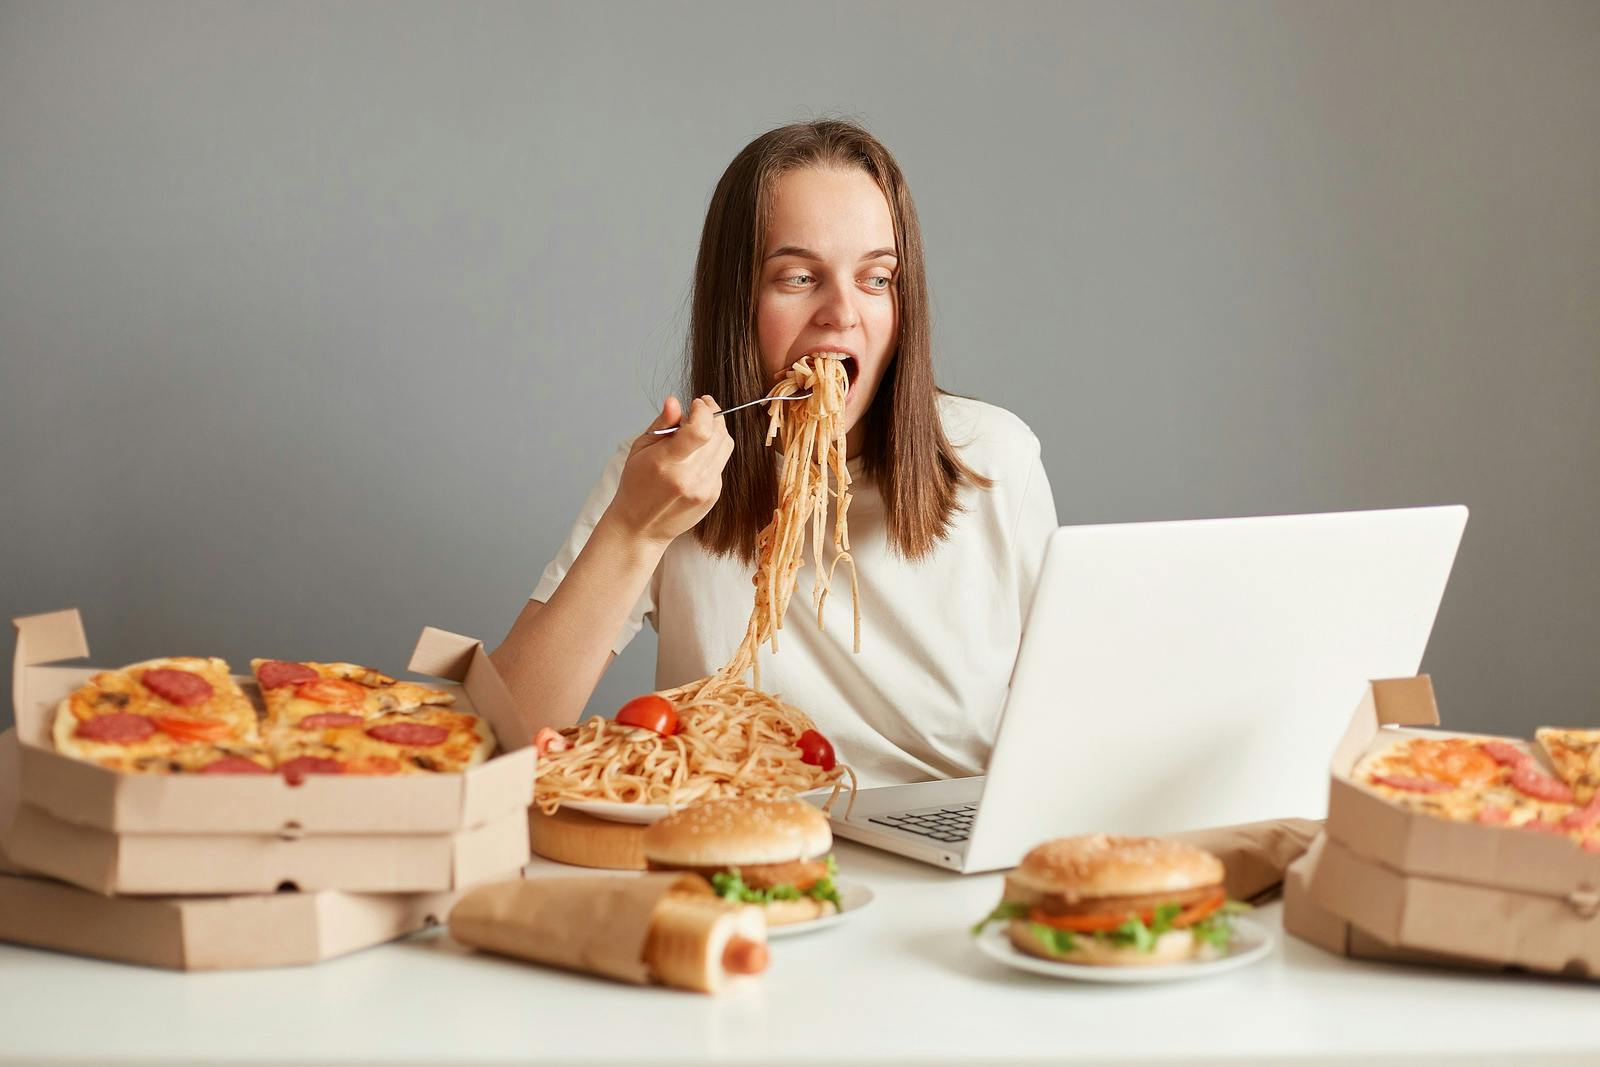 Indoor shot of busy hungry woman eating fast food while working on laptop, sitting at table against gray wall, working on laptop and eating pasta, keeps mouth open, looking at notebook display.
